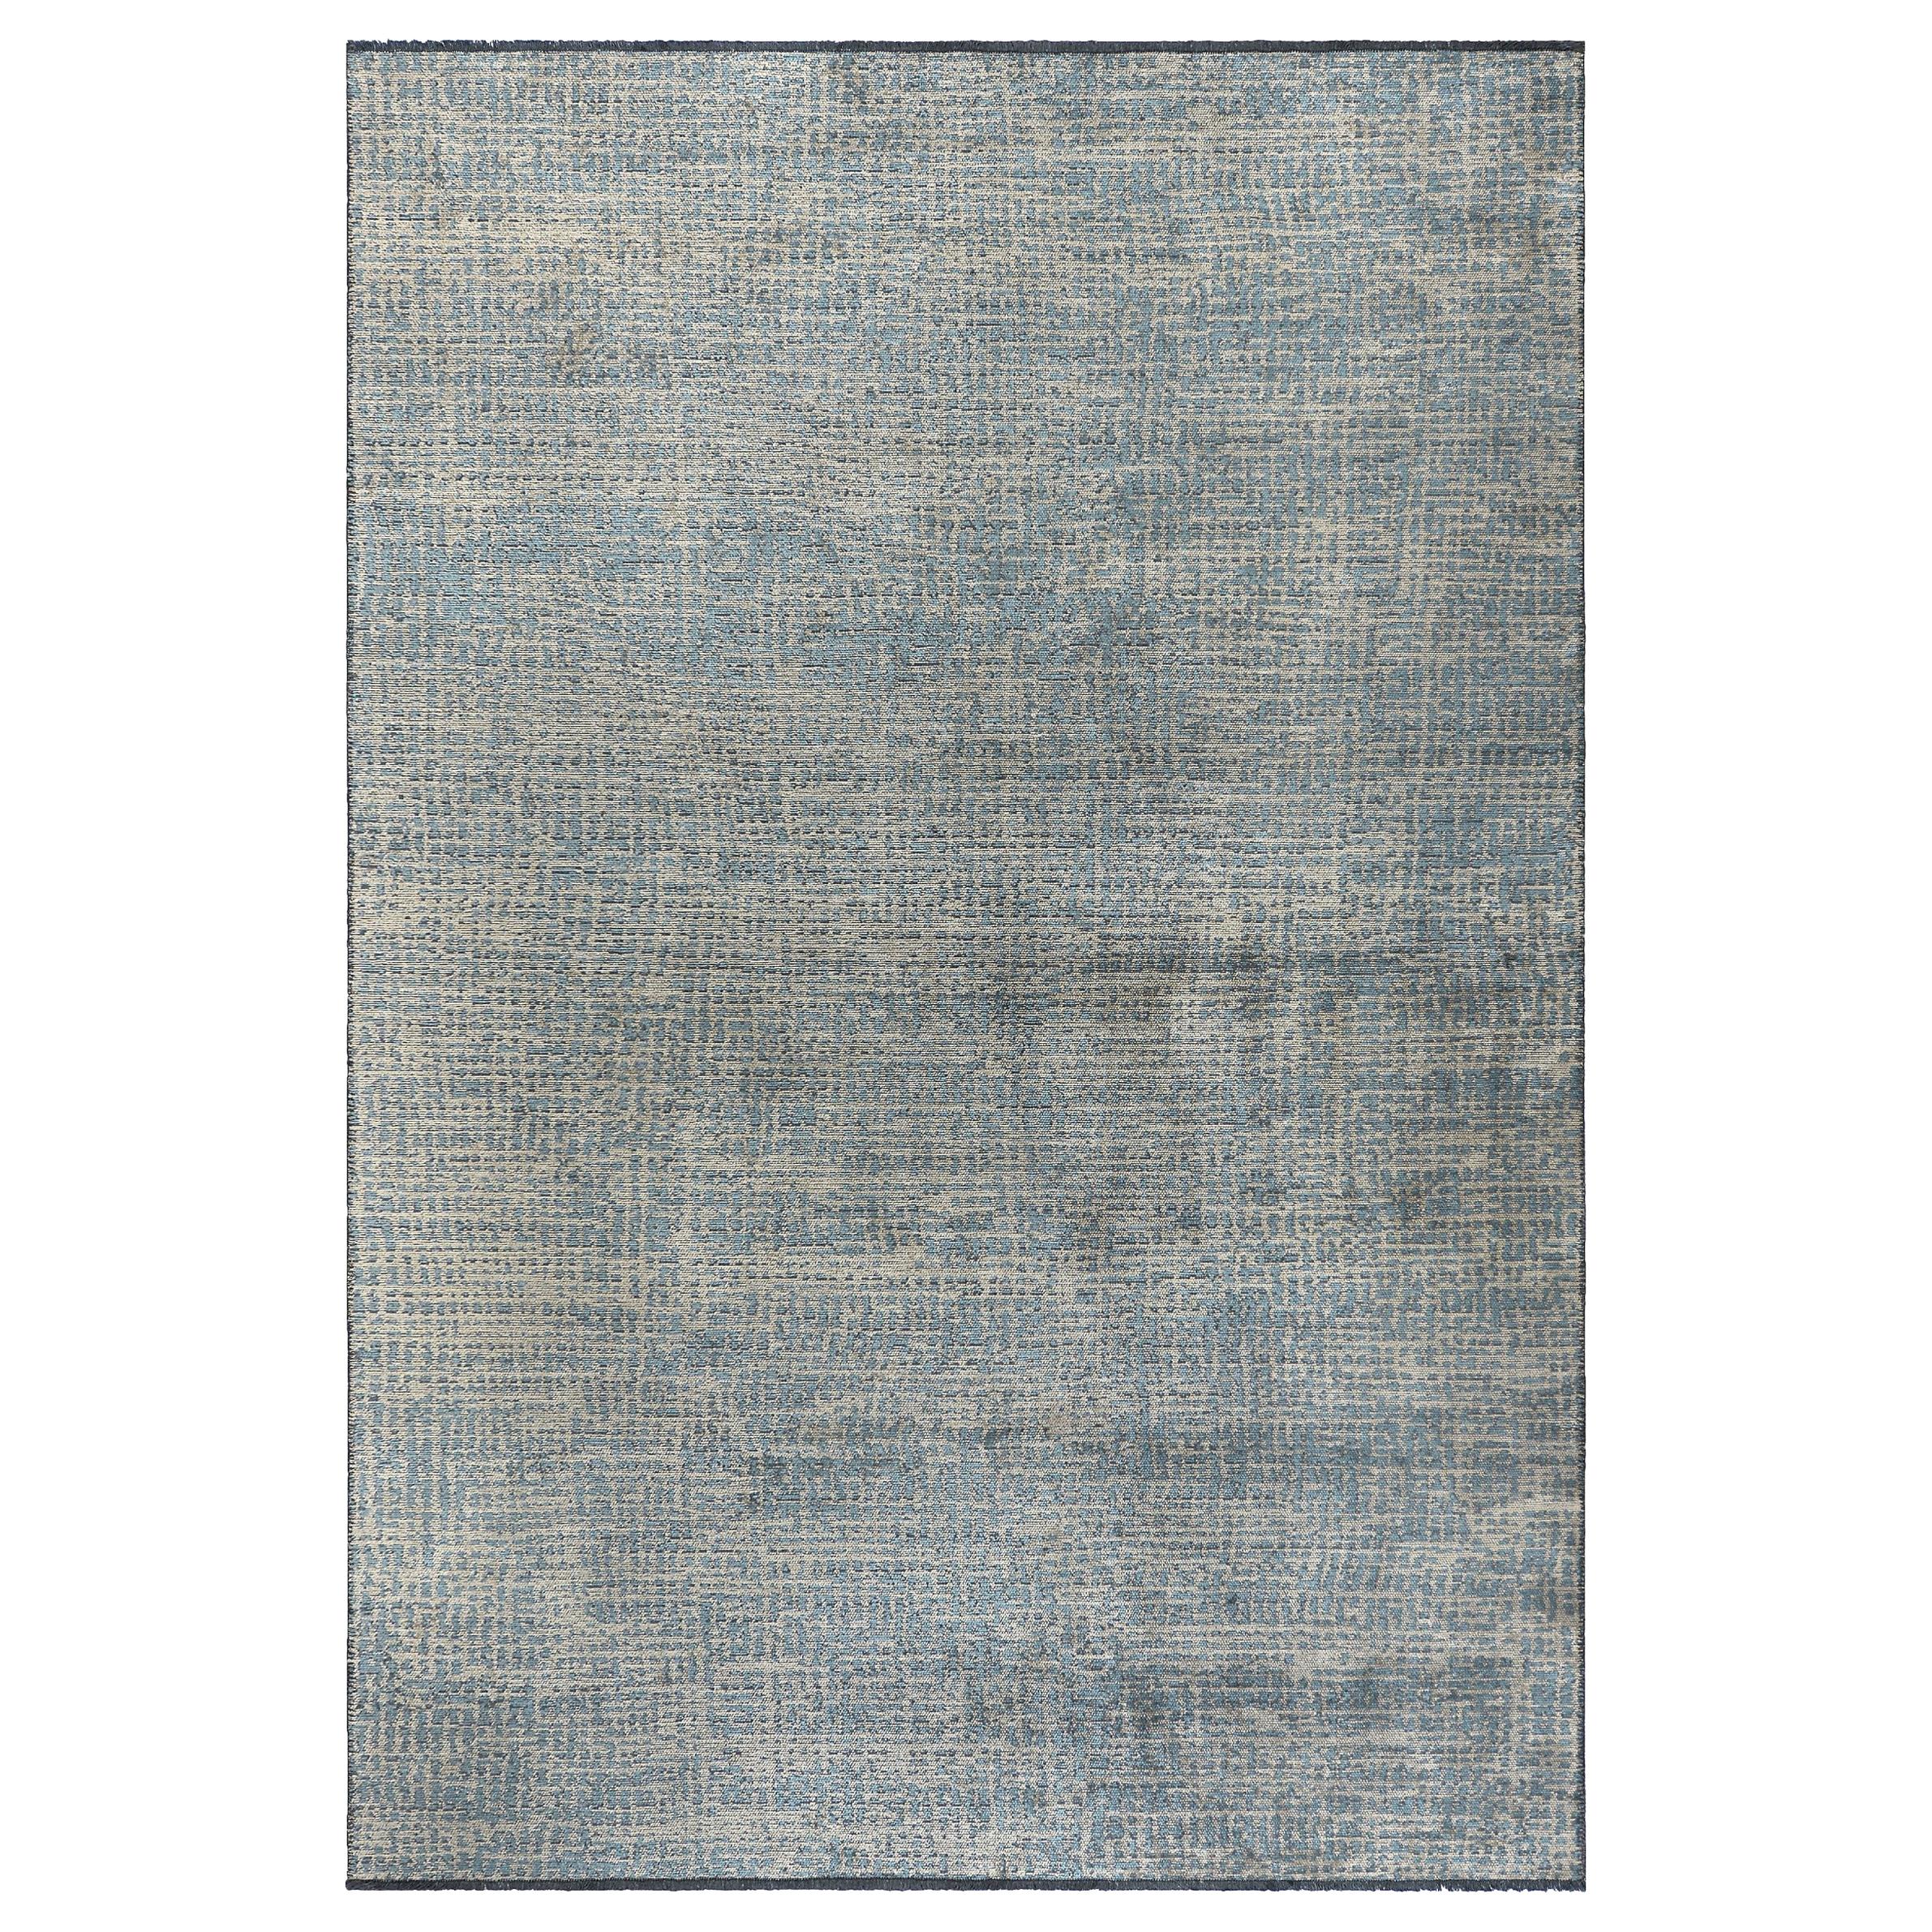 Light Blue and Silver Gray Tight Grid Abstract-Geo Pattern Rug with Shine